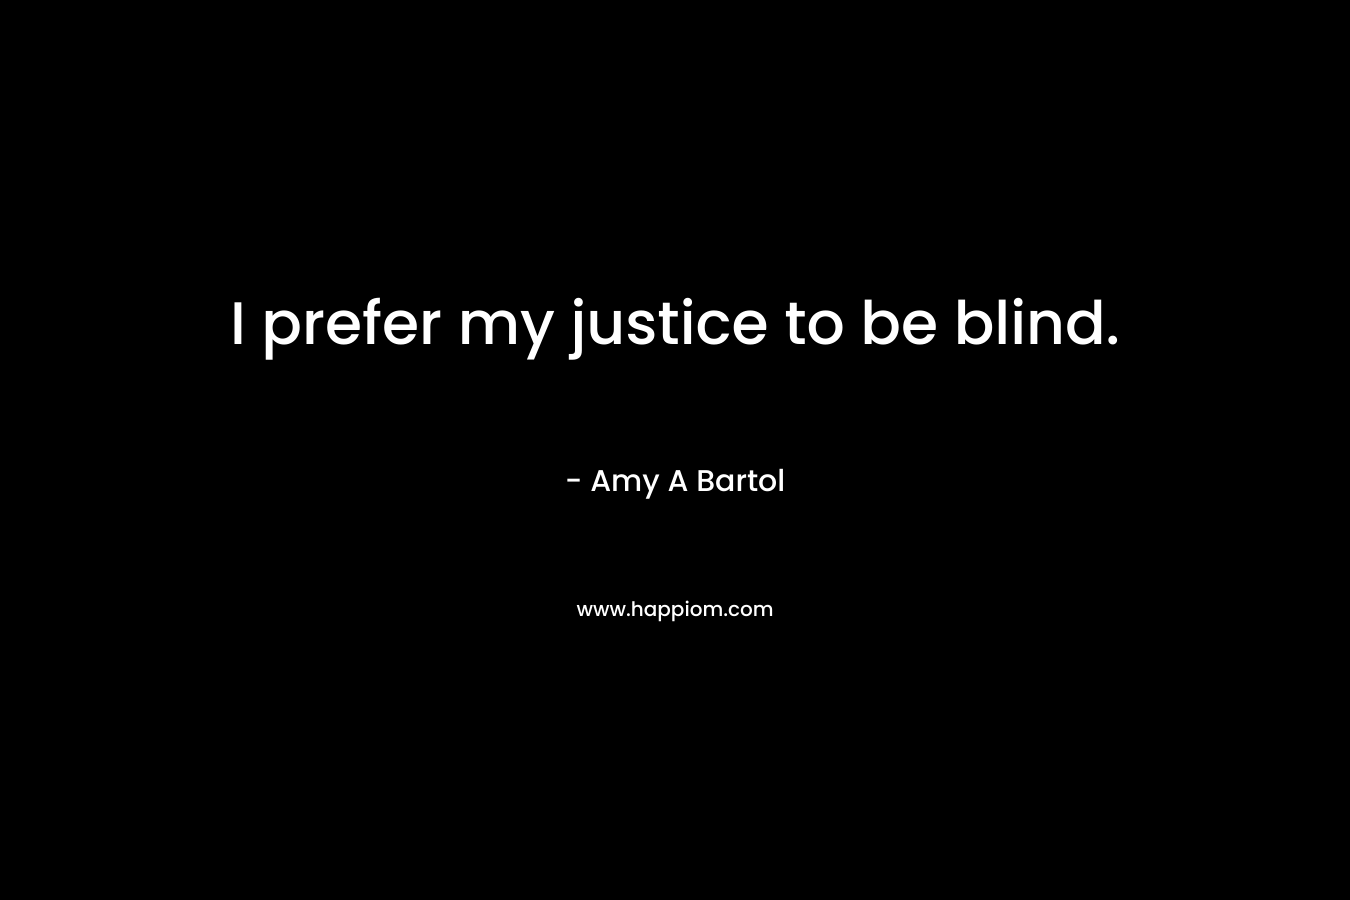 I prefer my justice to be blind. – Amy A Bartol